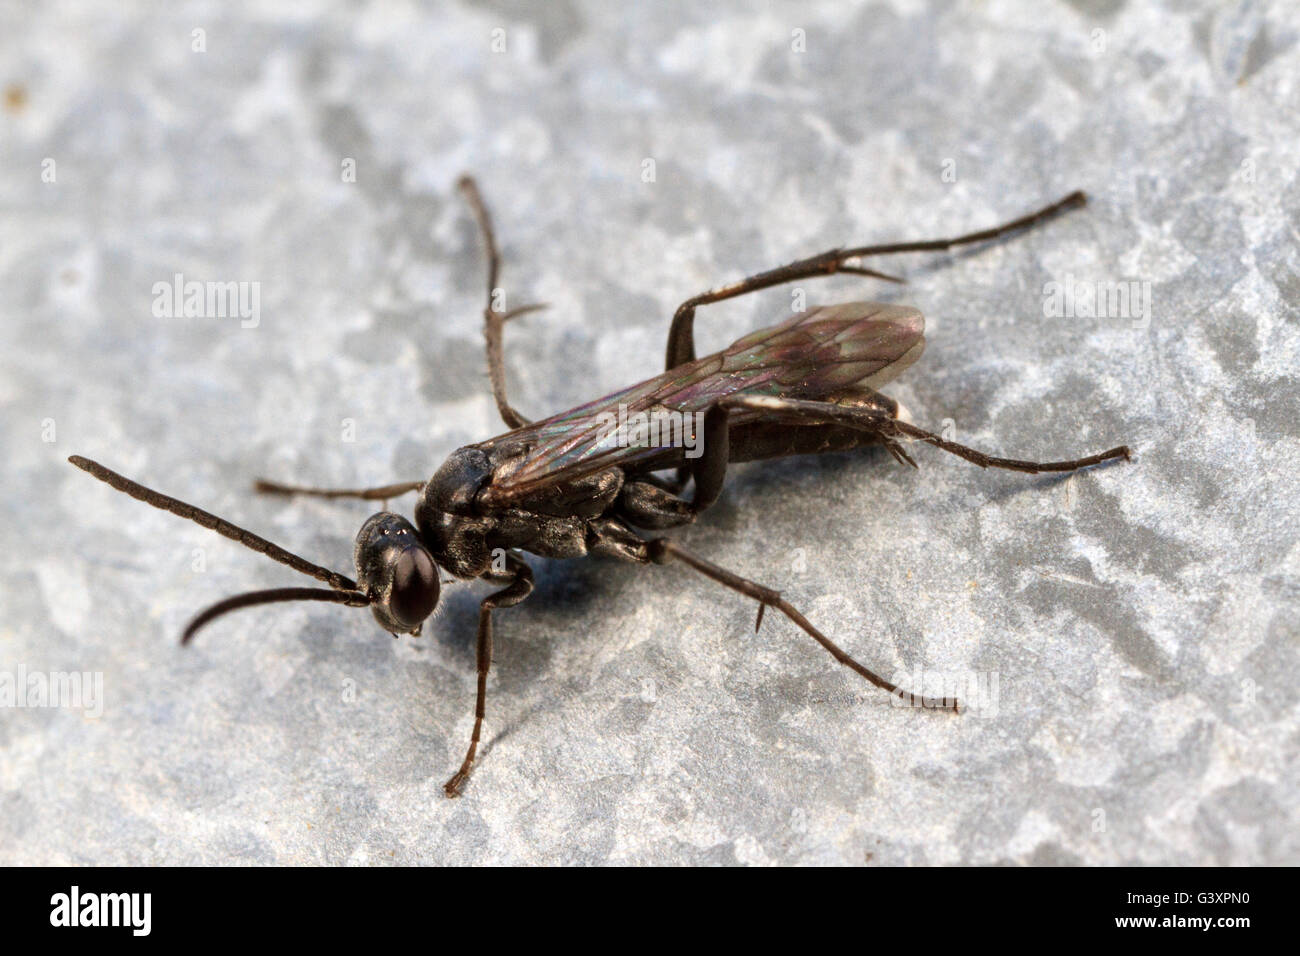 Spider Wasp (Pompilidae sp.) resting on metal Stock Photo